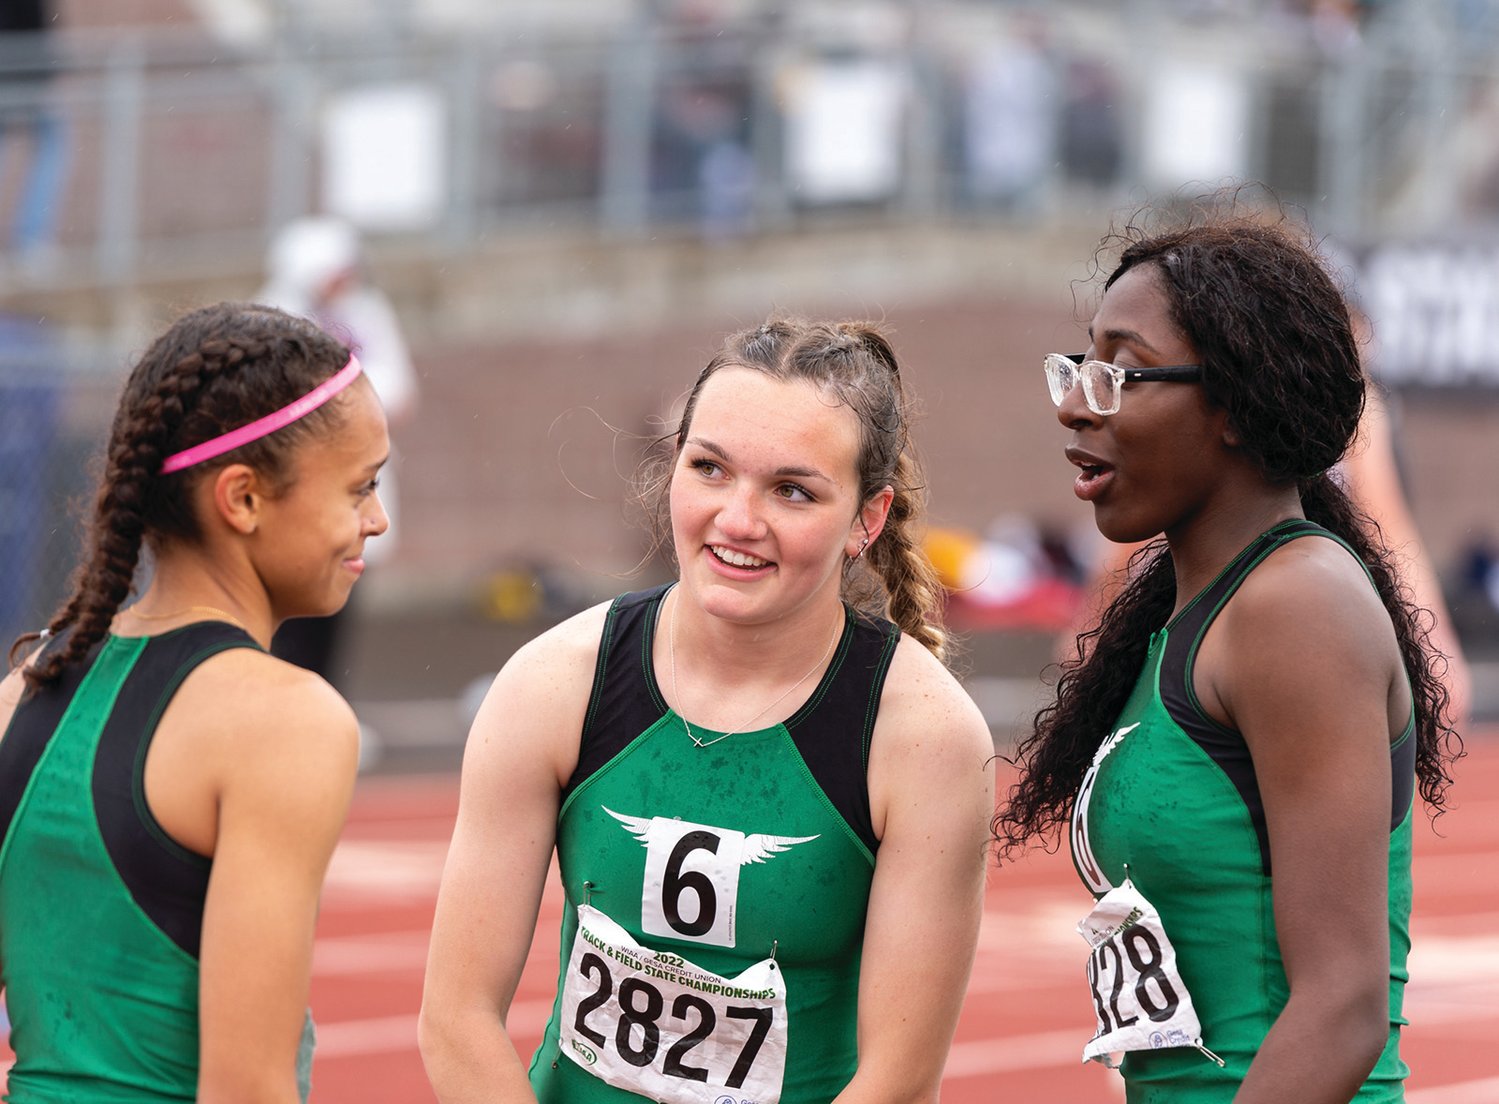 Tumwater's Ava Jones, Reese Heryford and Mariah Jett dissect their third-place run in the 2A Girls 4x400 at the 4A/3A/2A State Track and Field Championships on Saturday, May 28, 2022, at Mount Tahoma High School in Tacoma. (Joshua Hart/For The Chronicle)